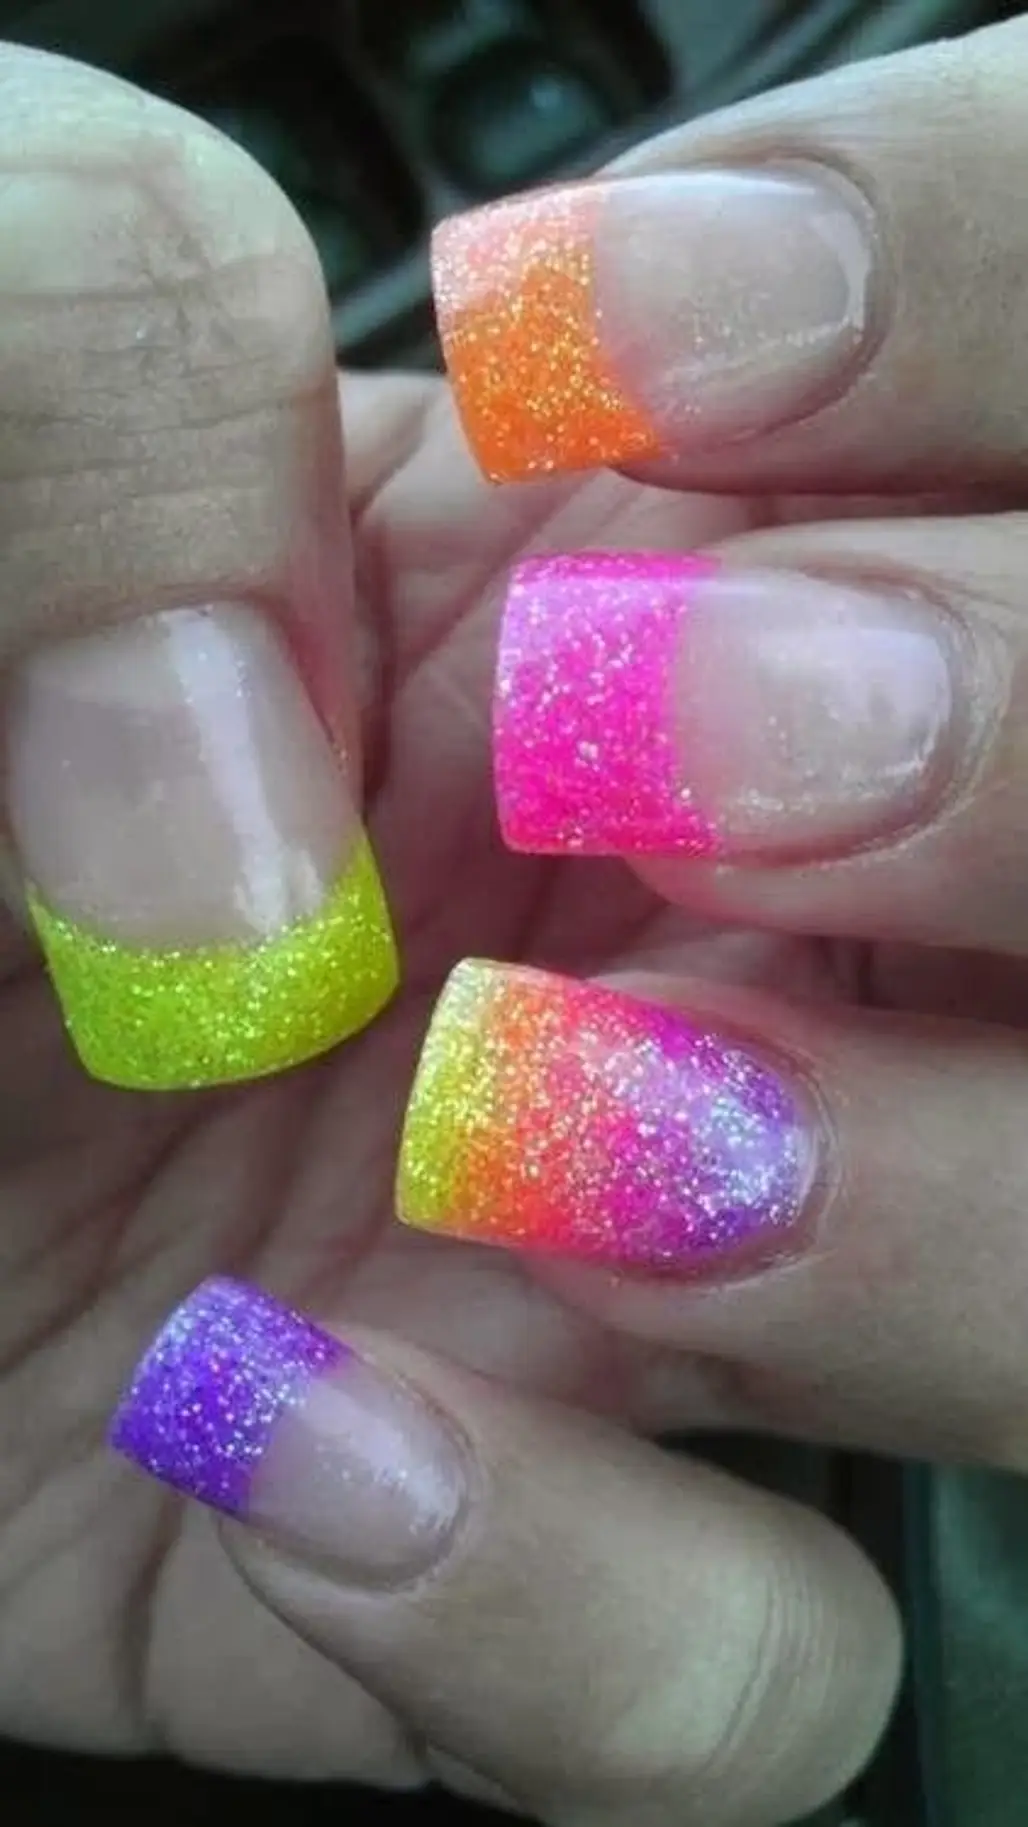 Neon Sparkles Are 80s with a Modern Twist